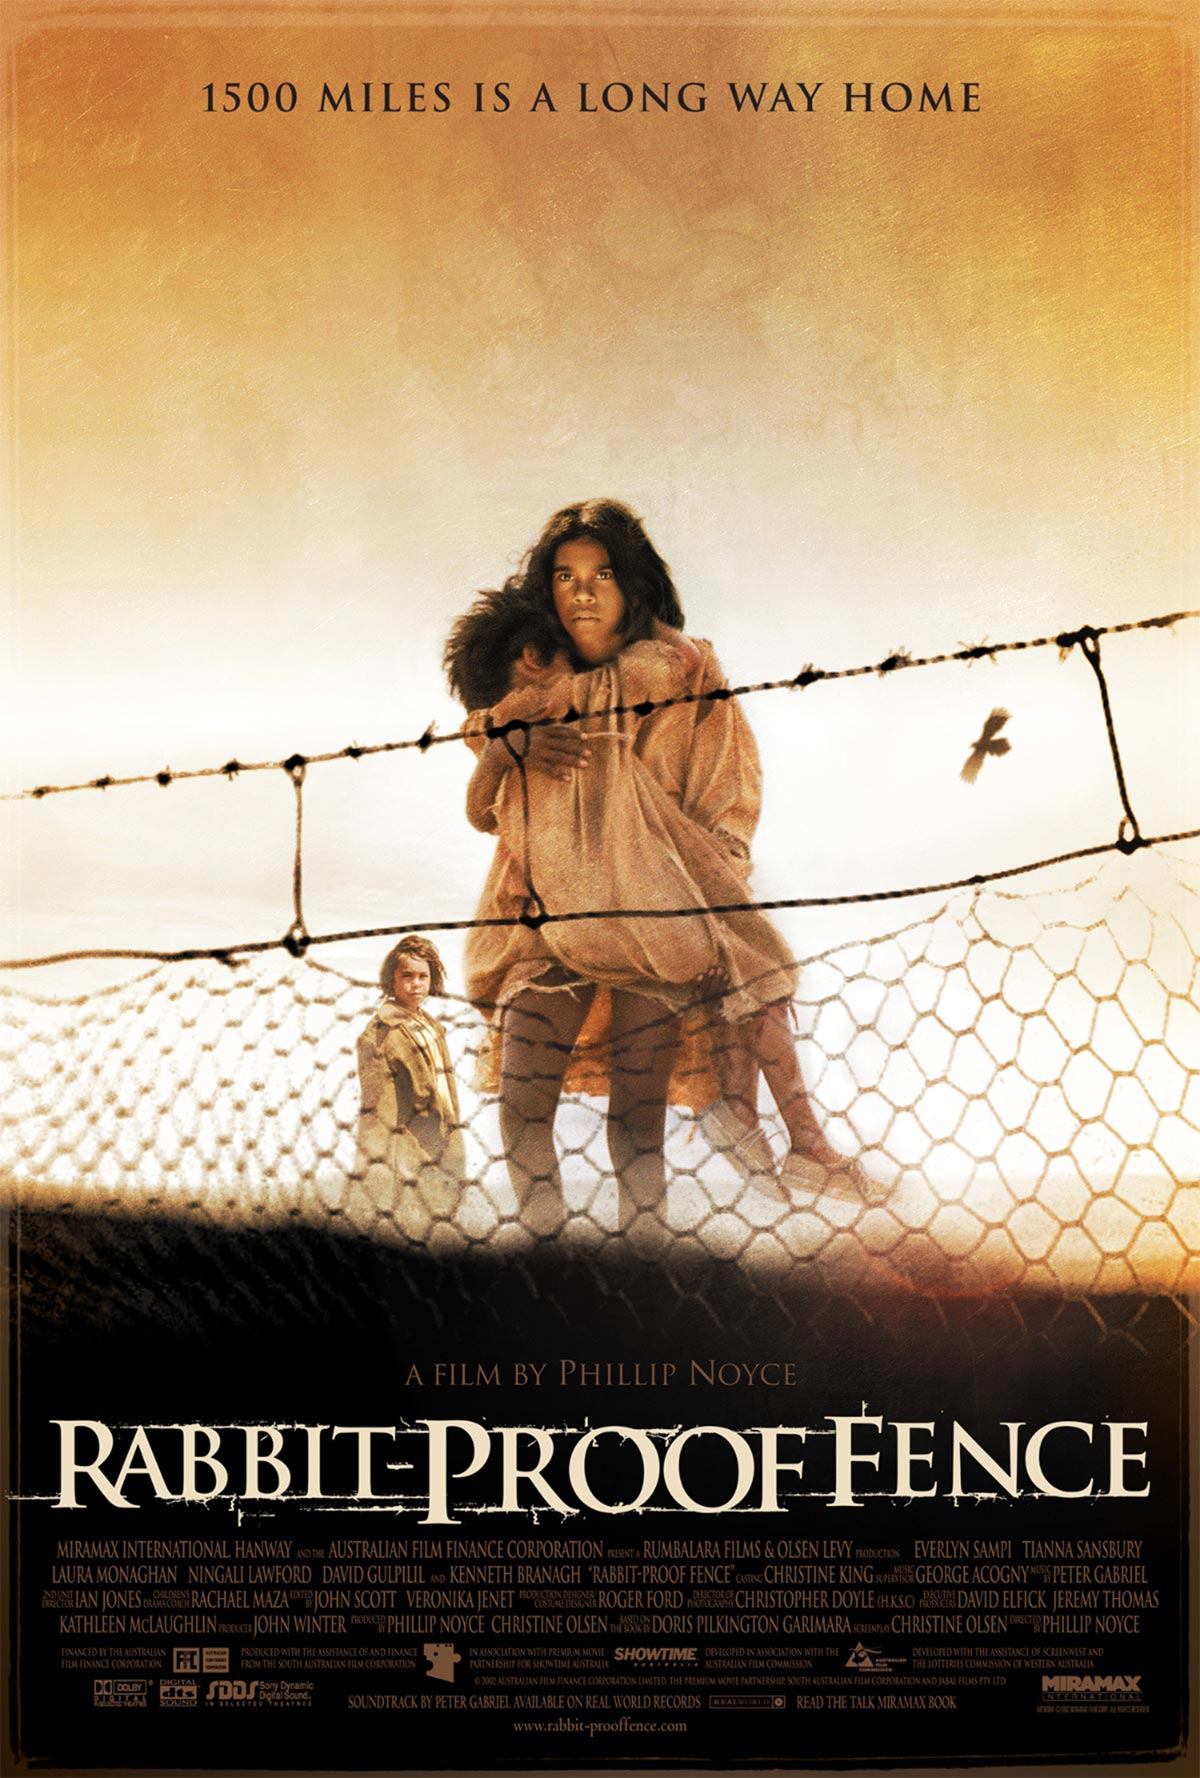 049_dreamogram-iconisus-key-art-movie-poster-rabbit-proof-fence_vertical-cover